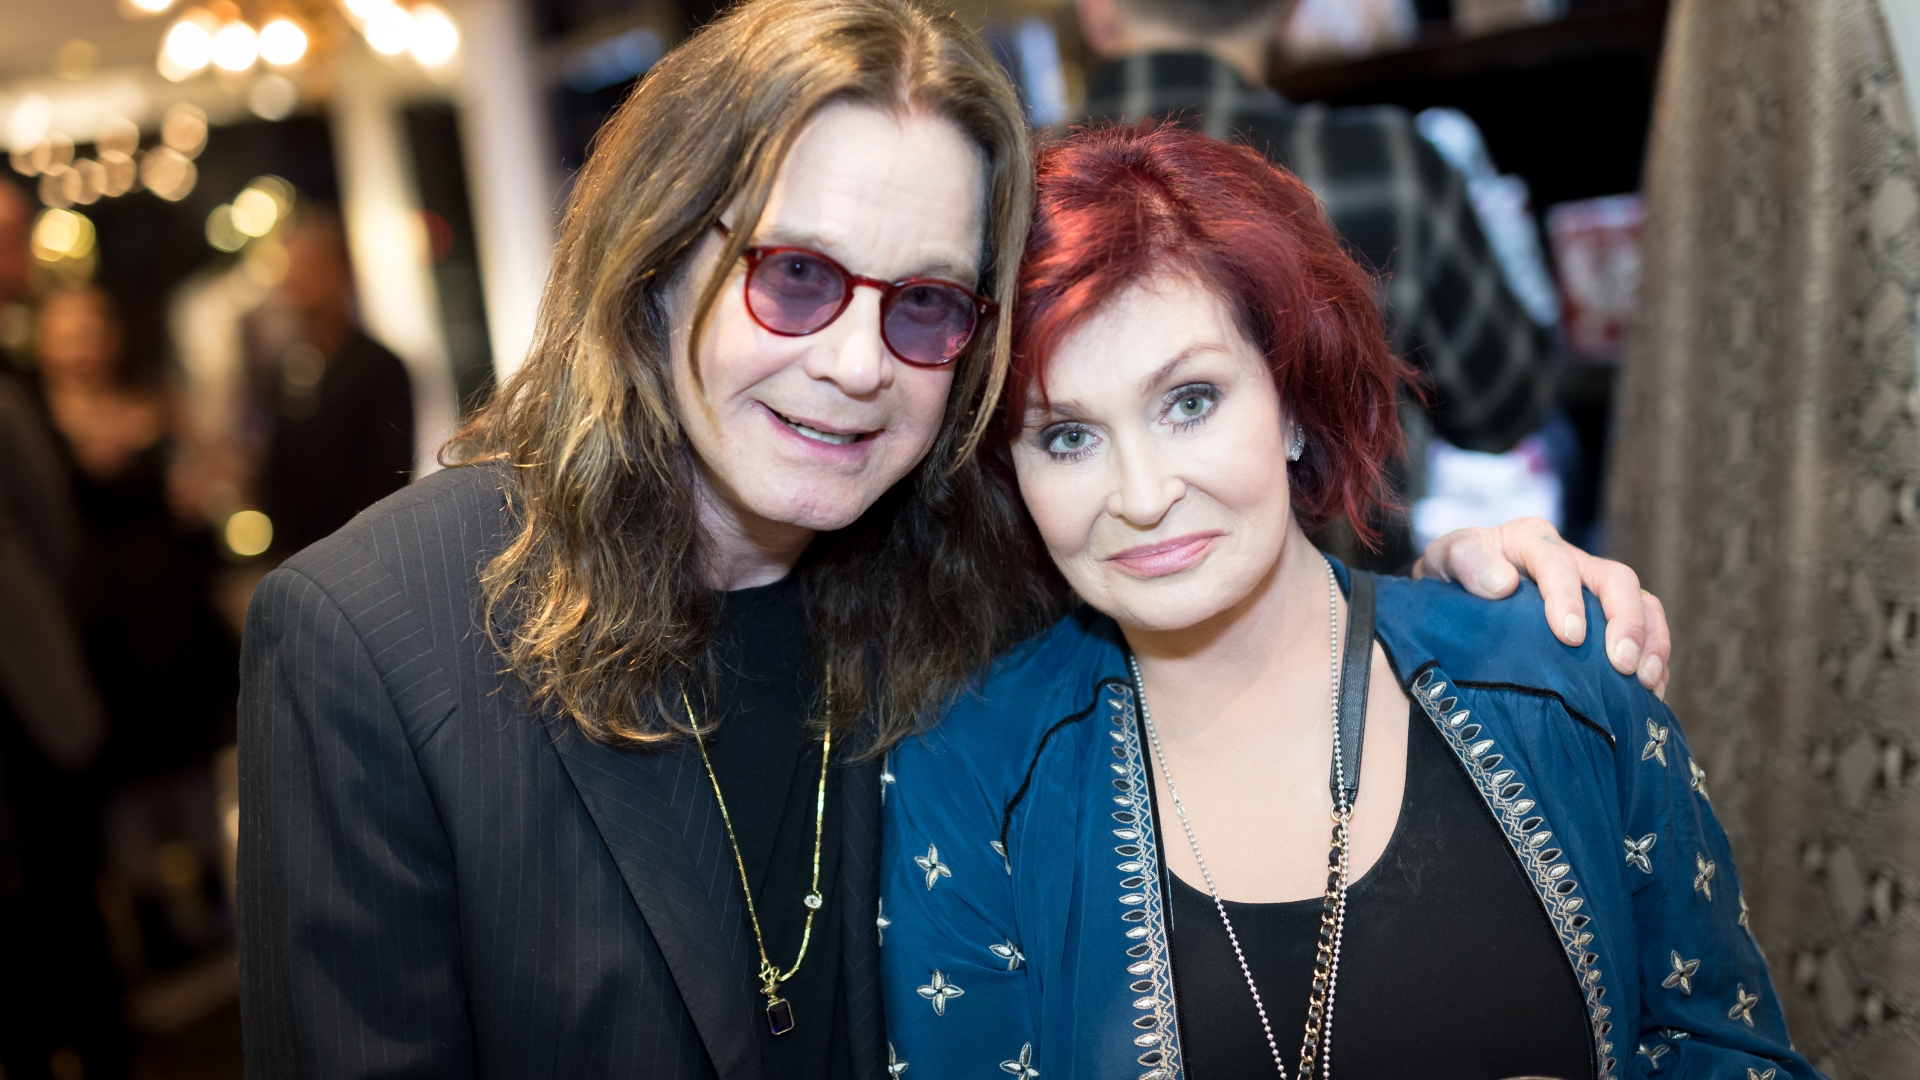 Ozzy Osbourne planning to build his own 'rehab wing' at mansion